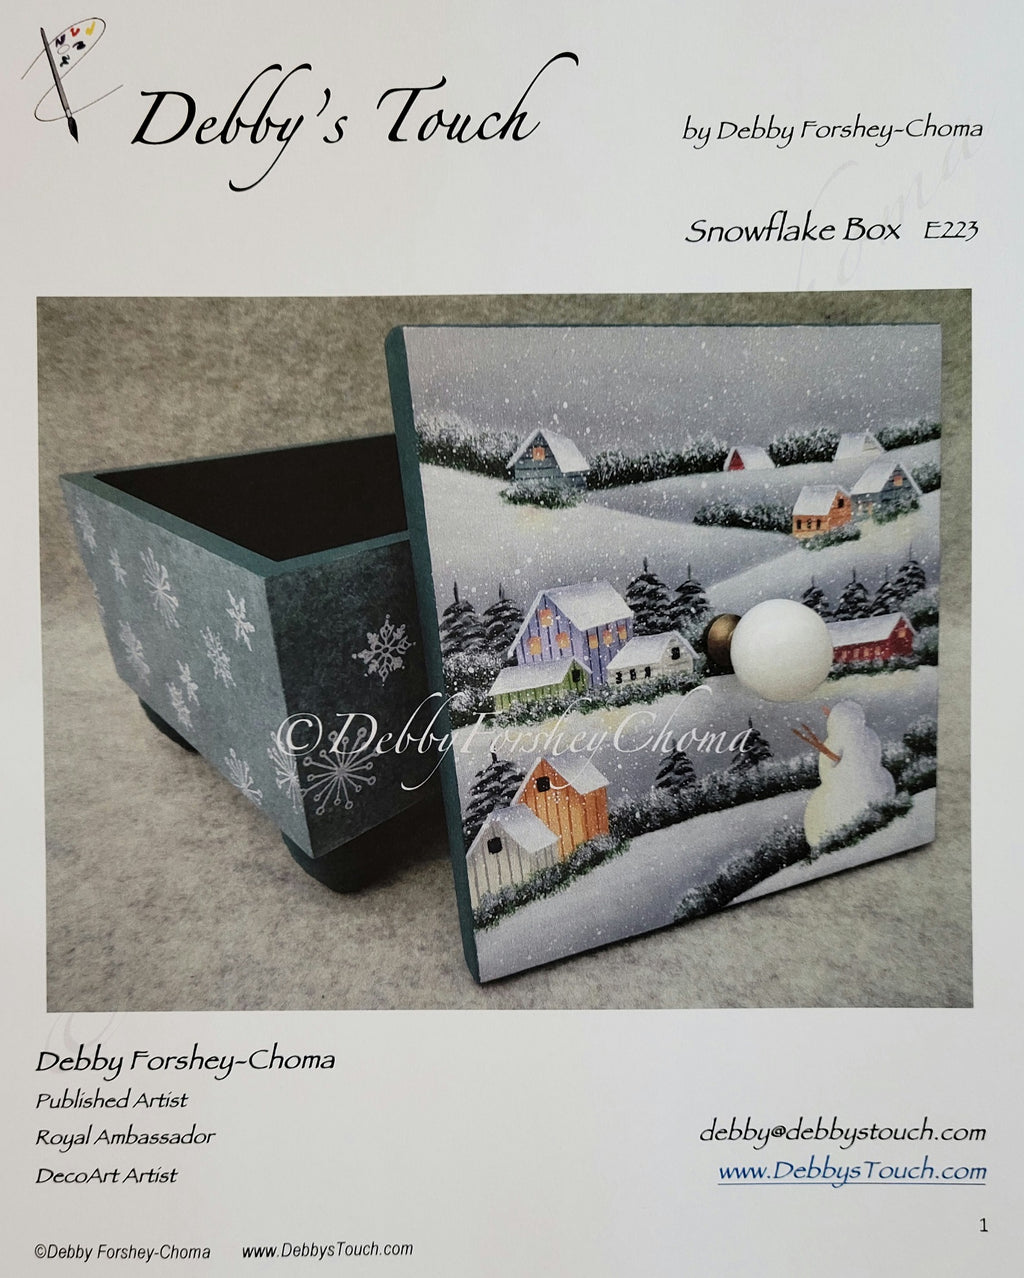 Snowflake Box packet by Debby's Touch